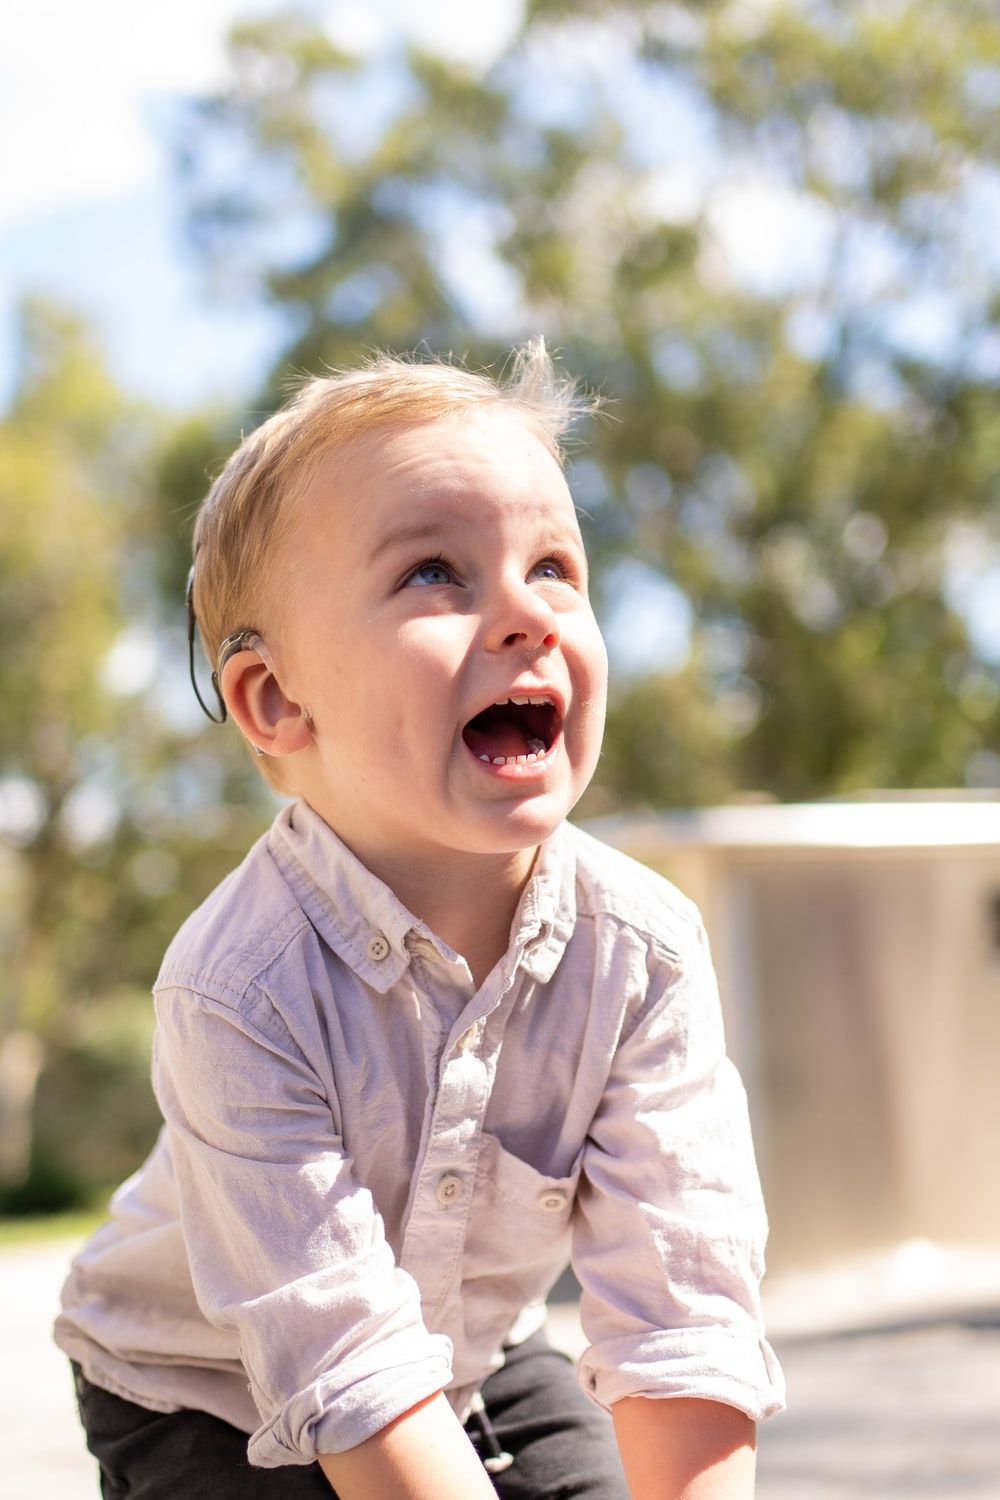 Boy Laughing Picture. Download Free Image